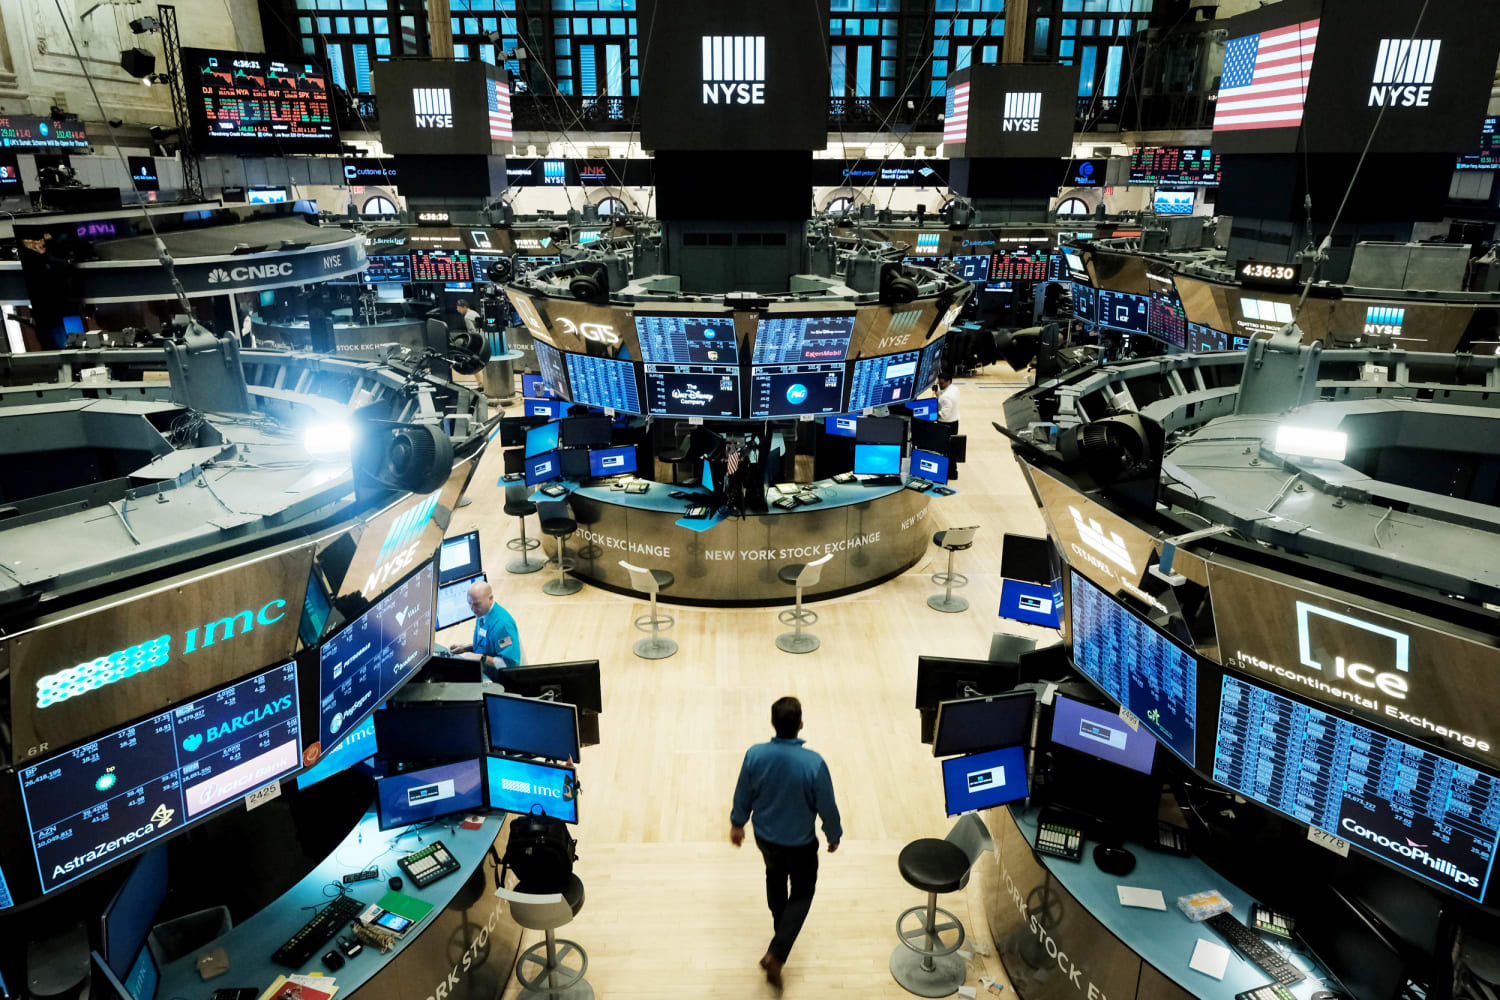 New York stock exchange and it’s working